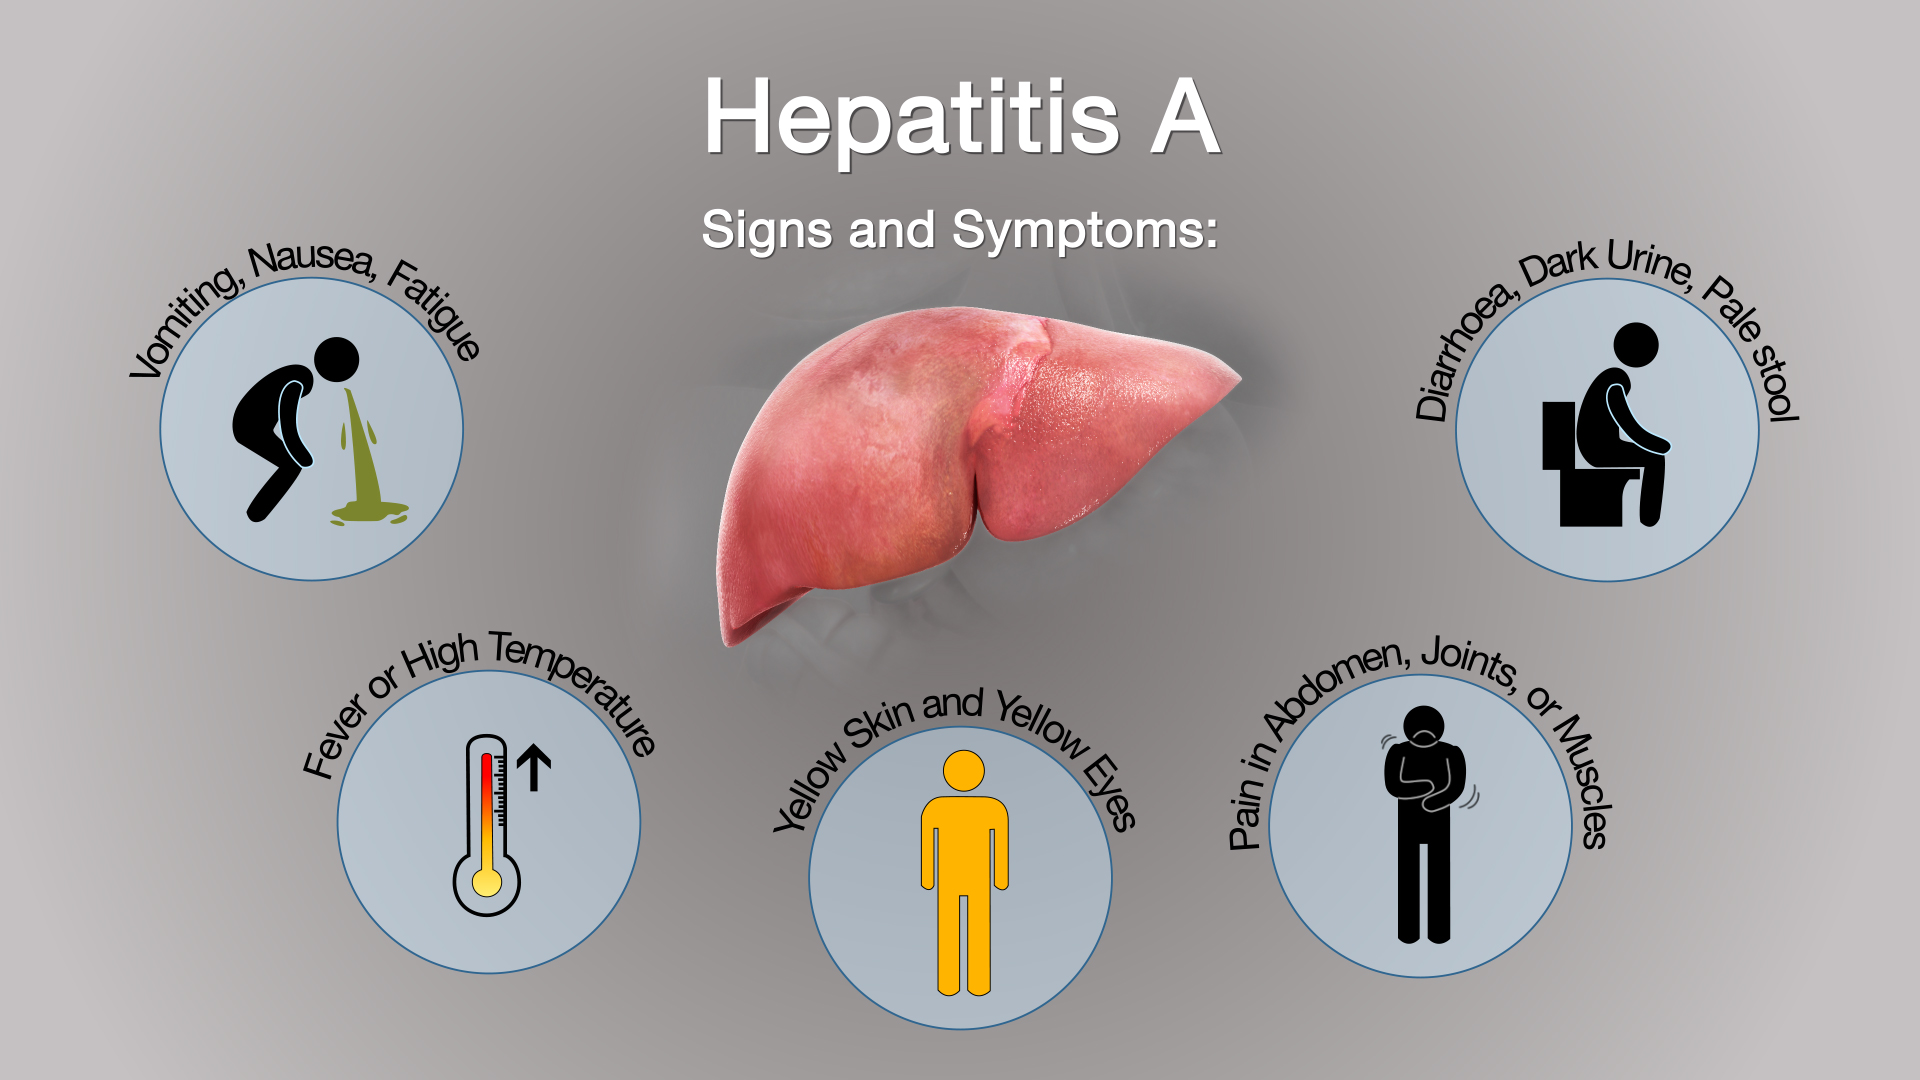 Hepatitis A: Symptoms, Causes, and Treatment - Scientific Animations